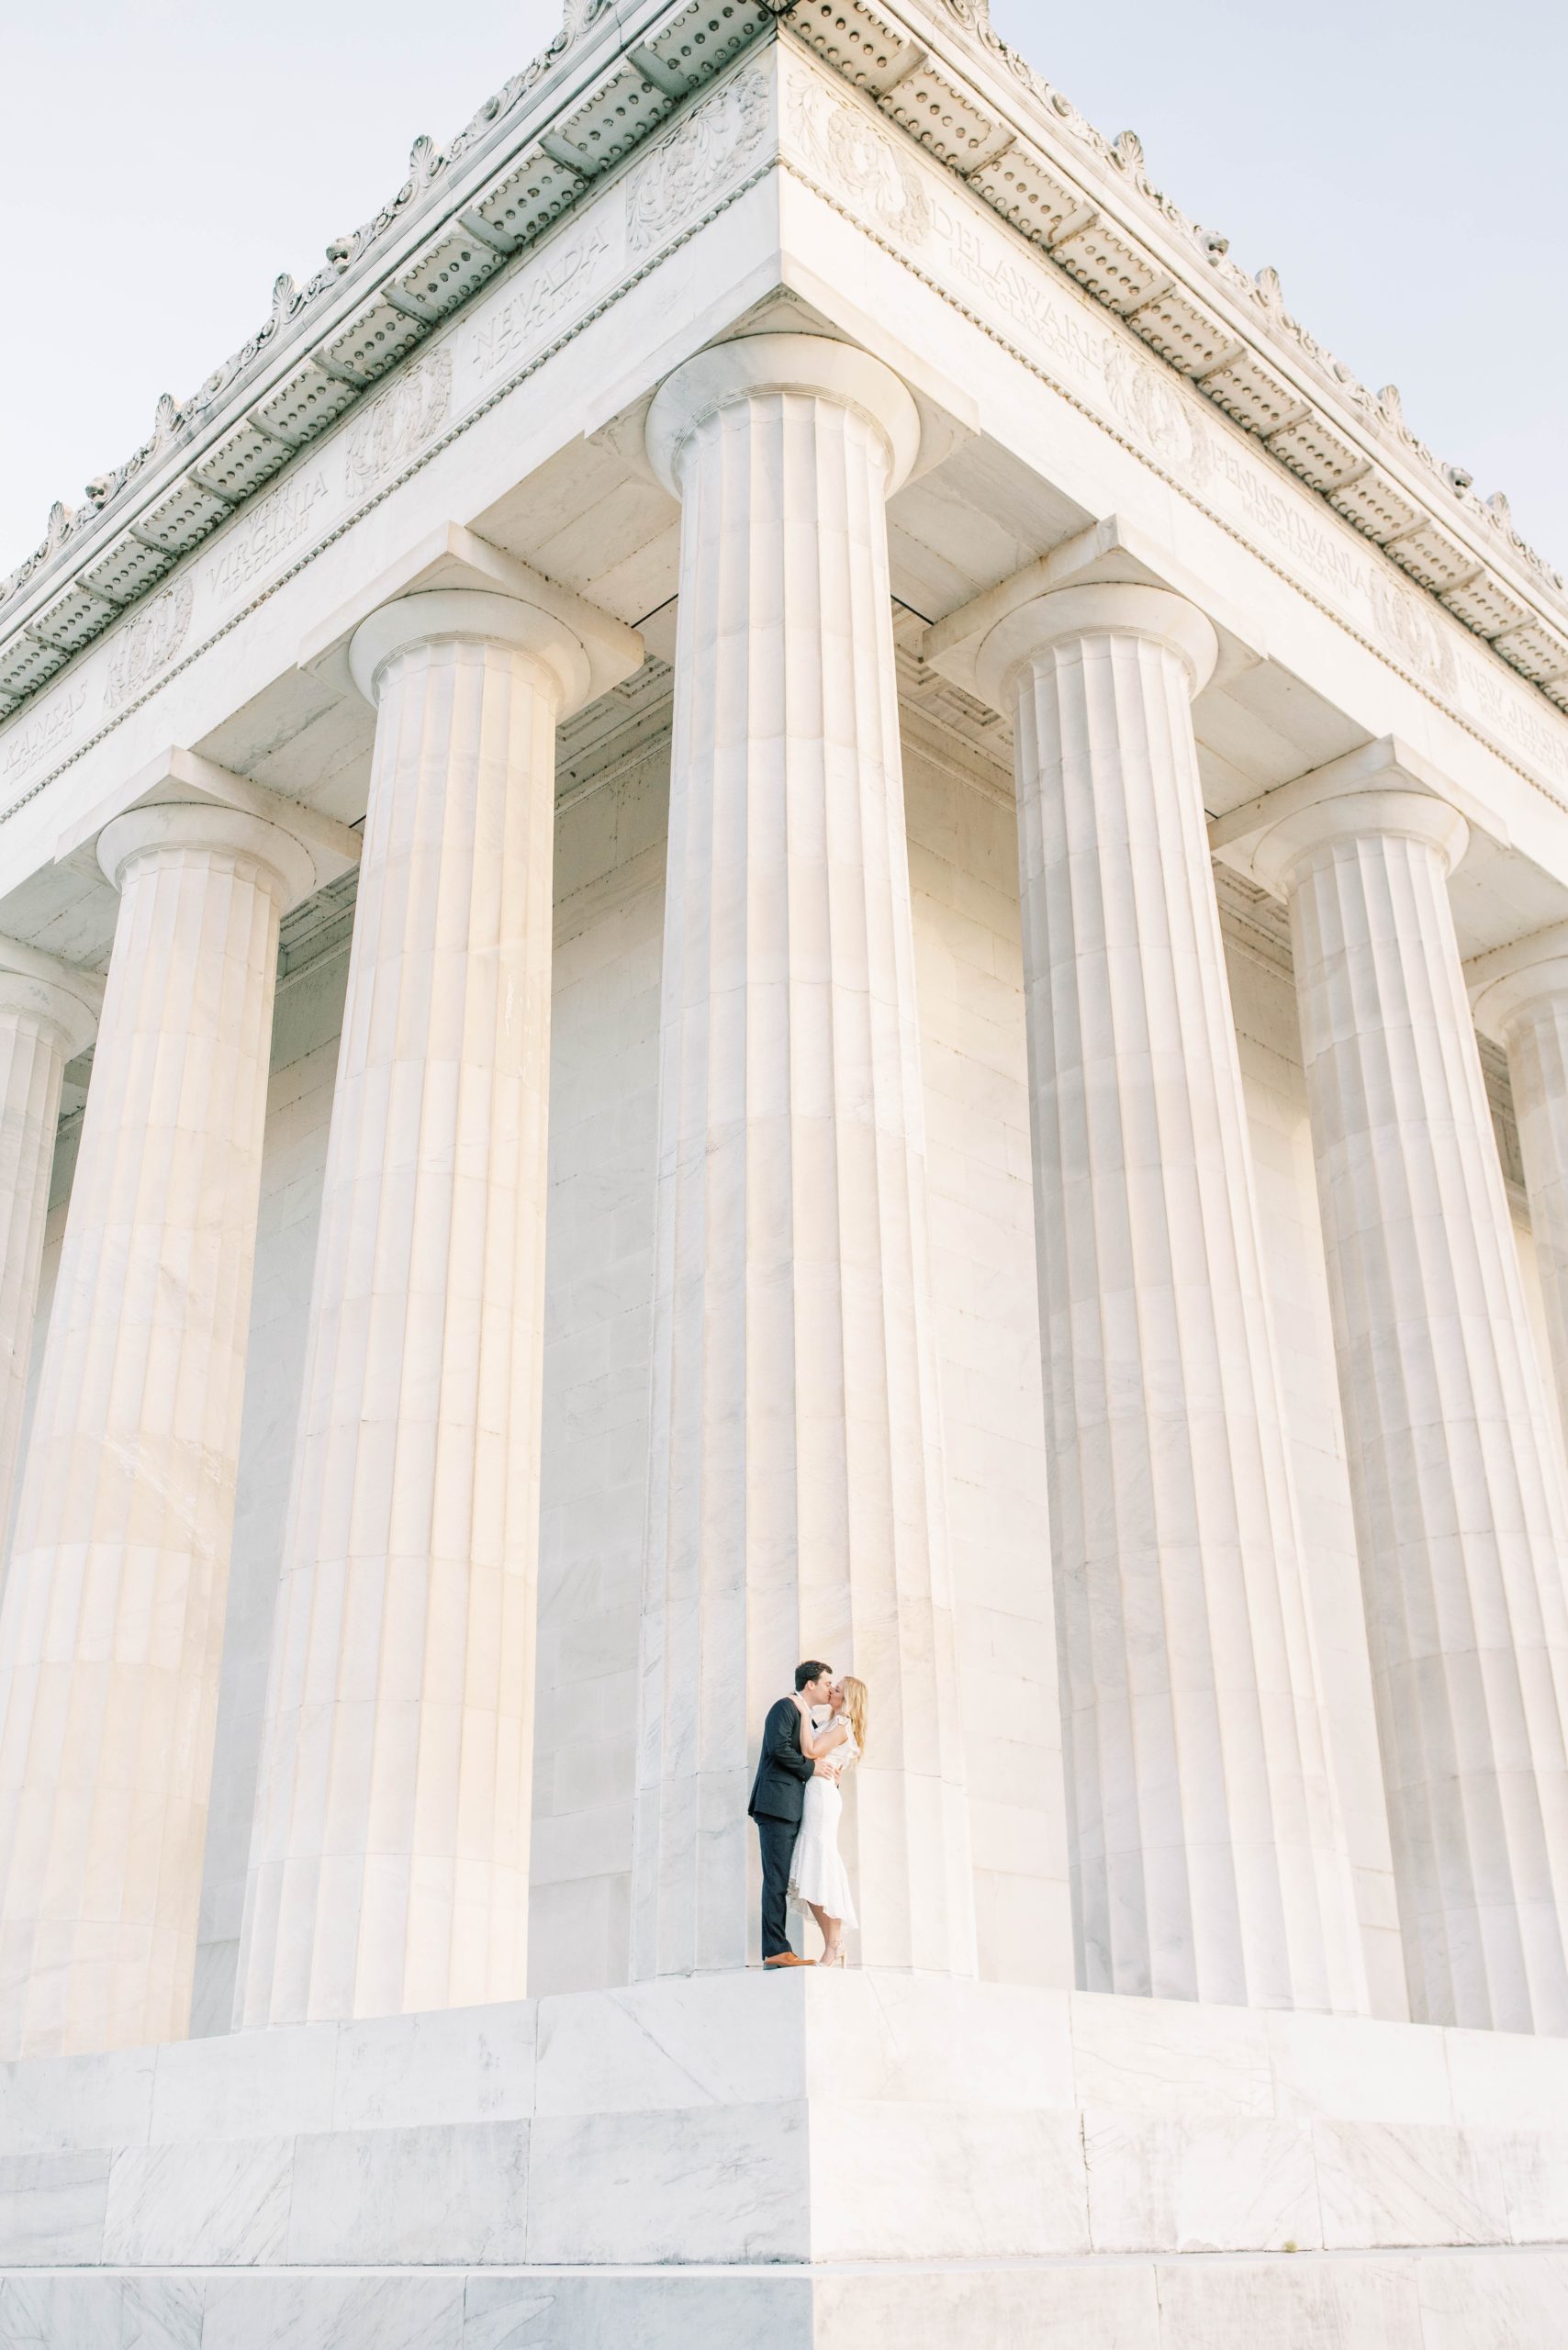 A stunning sunrise engagement session at the iconic monuments in Washington, DC featuring a stylish couple alongside their adorable dog!